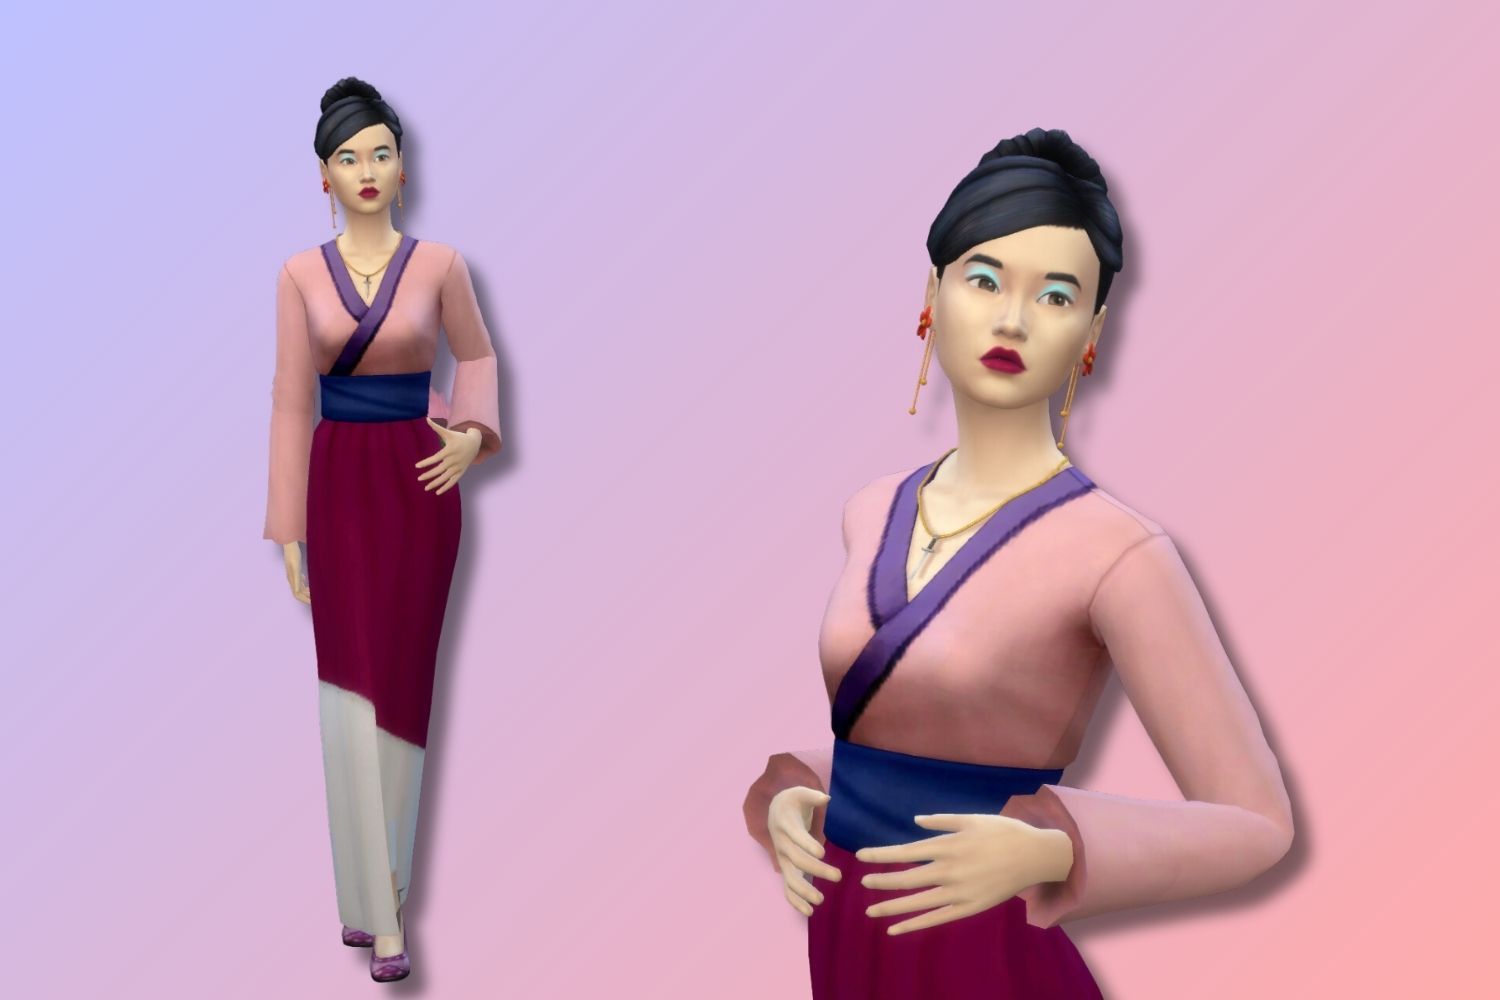 A Sim resembling Disney's Mulan stands against a pink background.